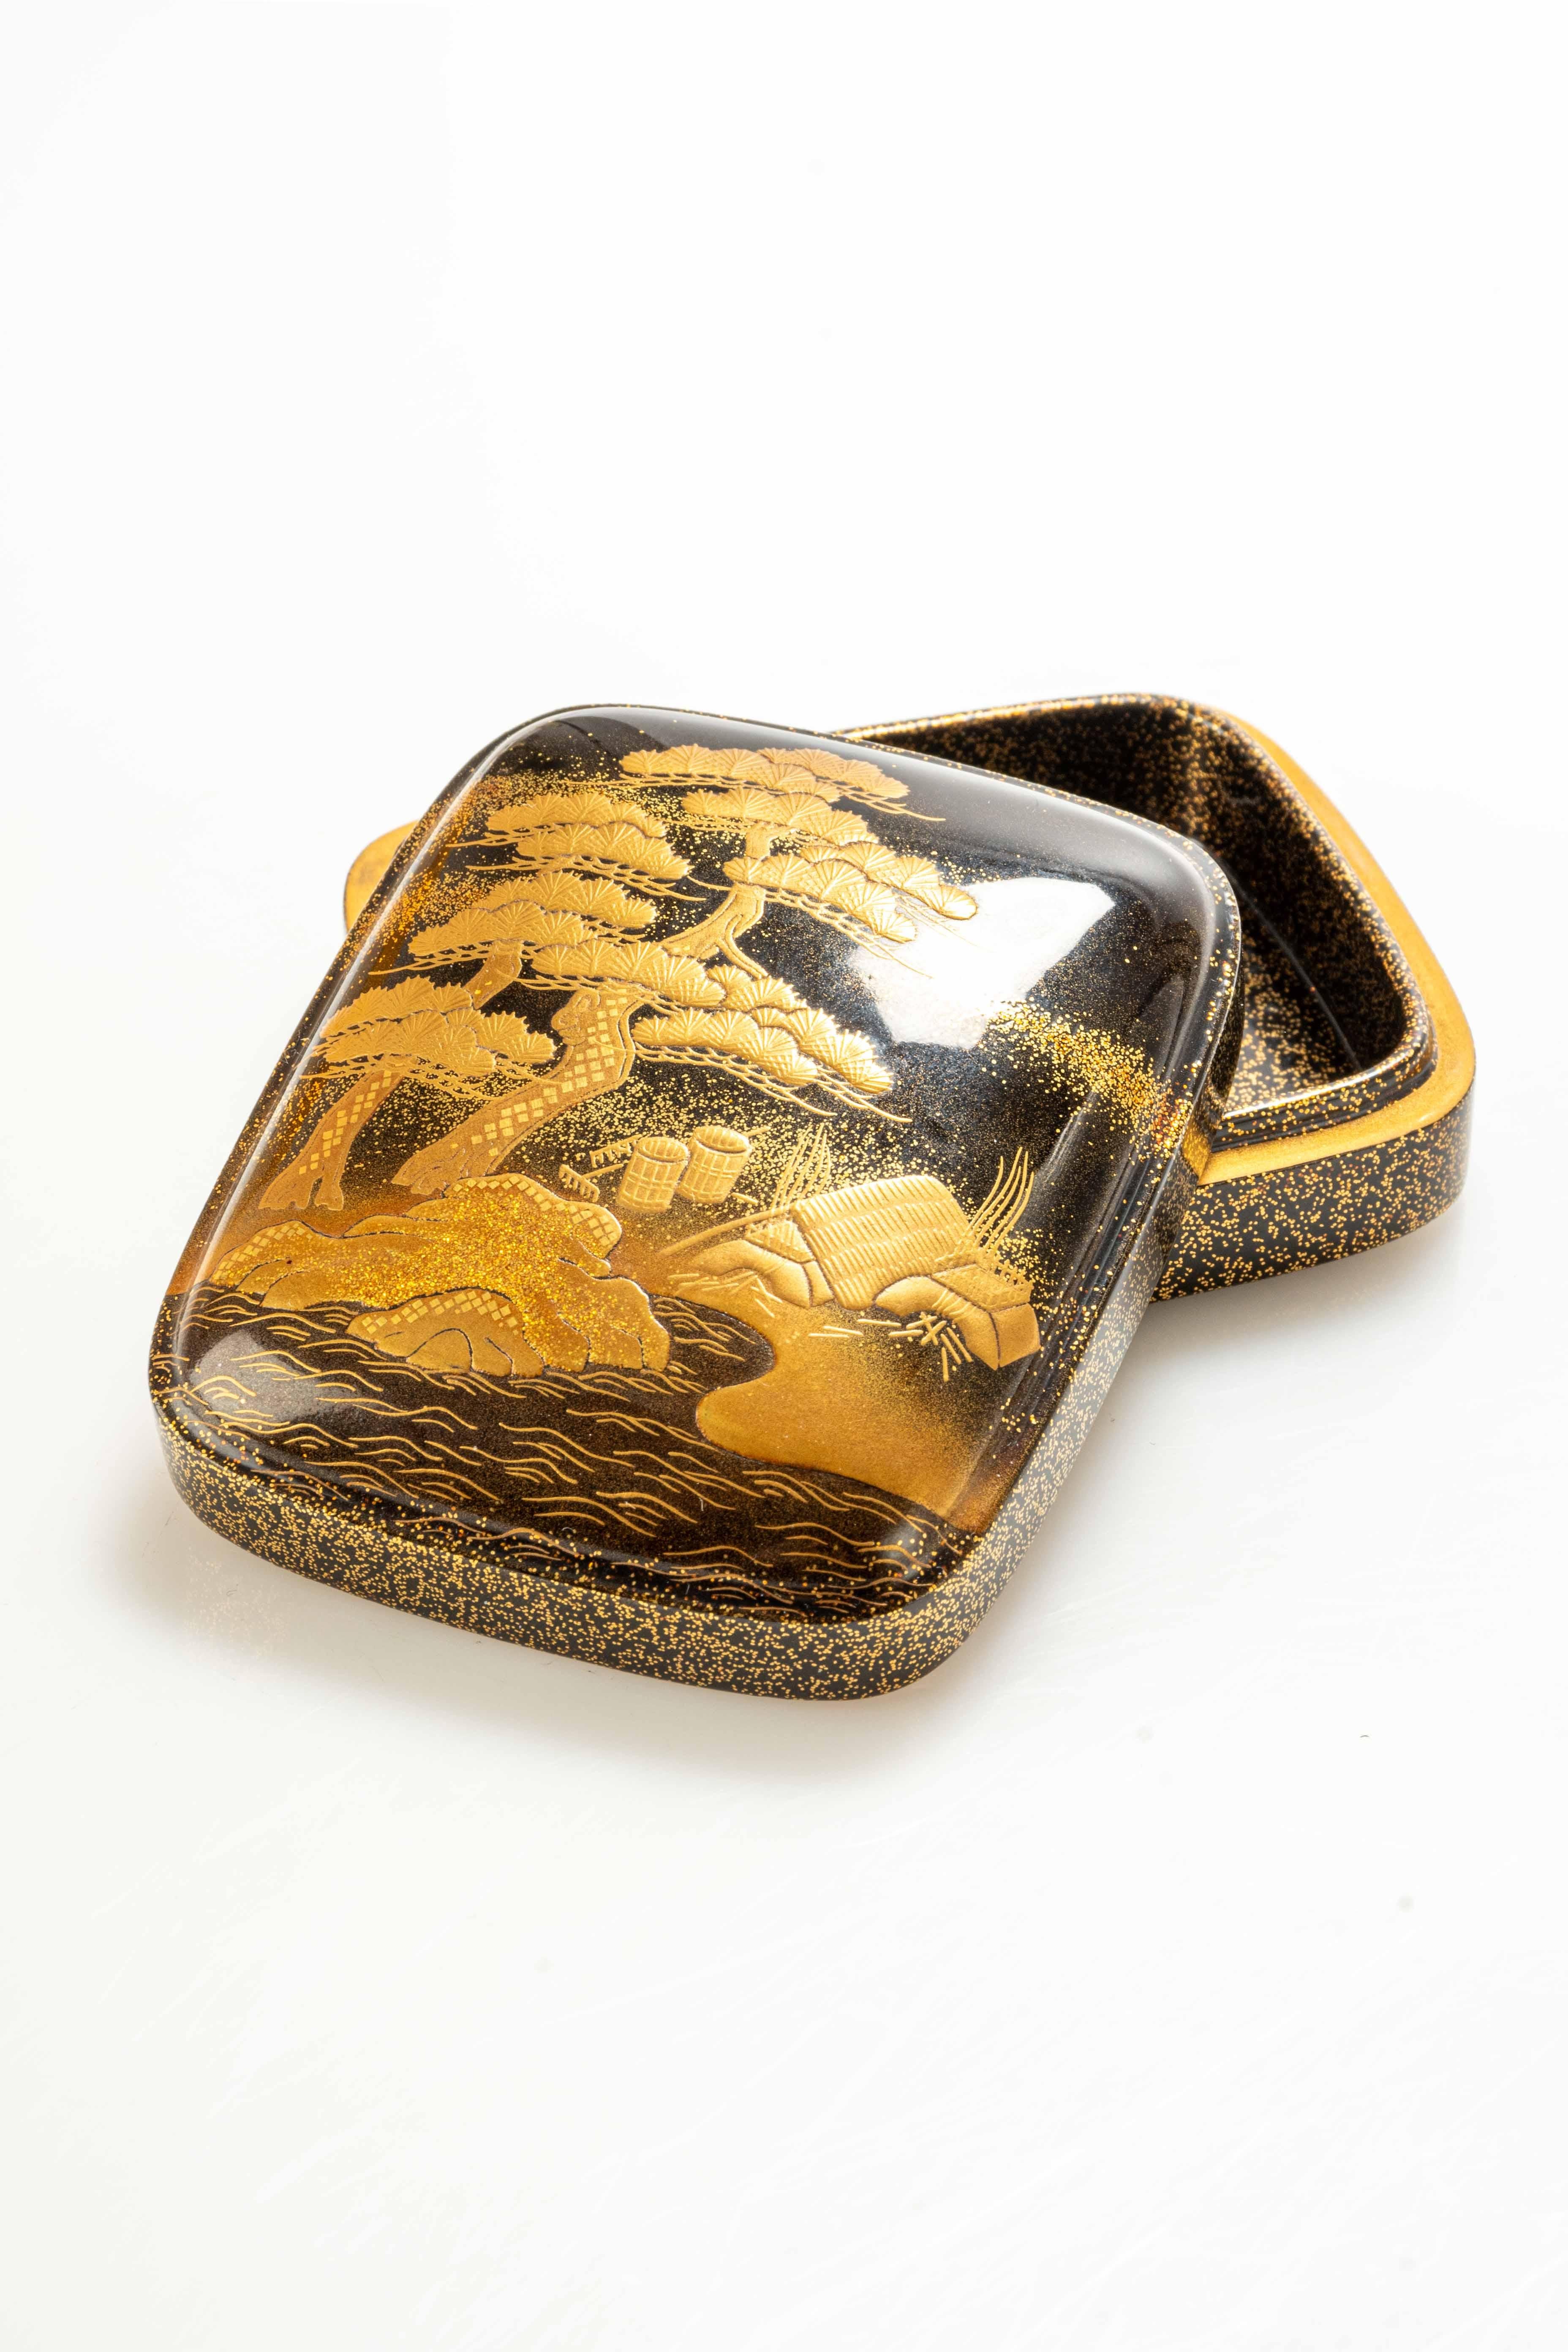 Kogo box in maki-è lacquer, with a domed lid depicting a naturalistic scene. The gold decoration depicts the Japanese pine, known as Matsu, and a typical house with a thatched roof along the banks of a waterway.

Sold with its tomobako.

Origin: